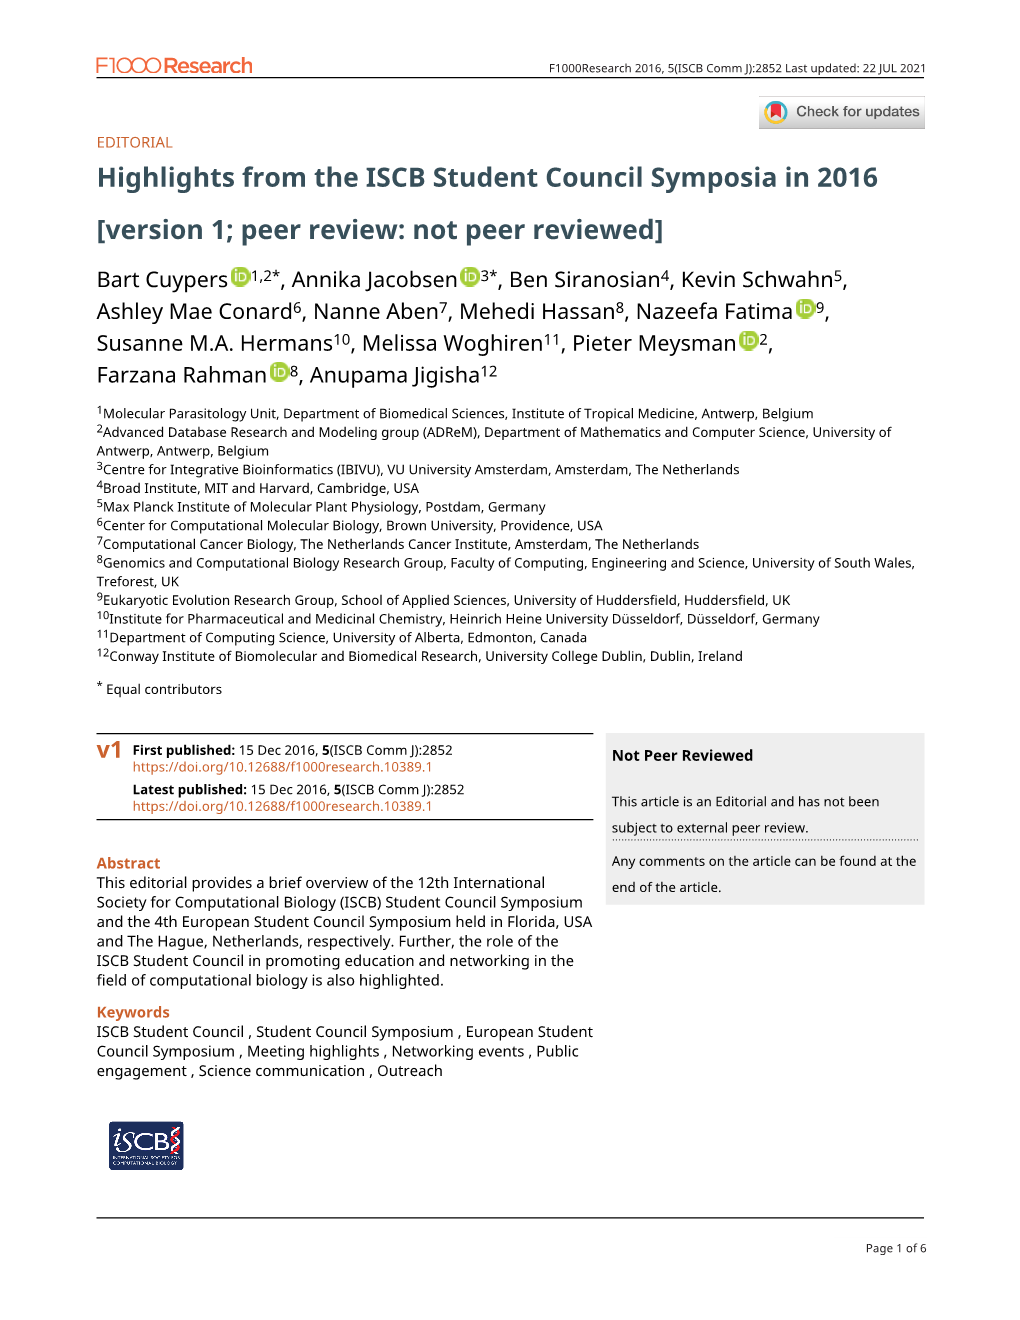 Highlights from the ISCB Student Council Symposia in 2016 [Version 1; Peer Review: Not Peer Reviewed]